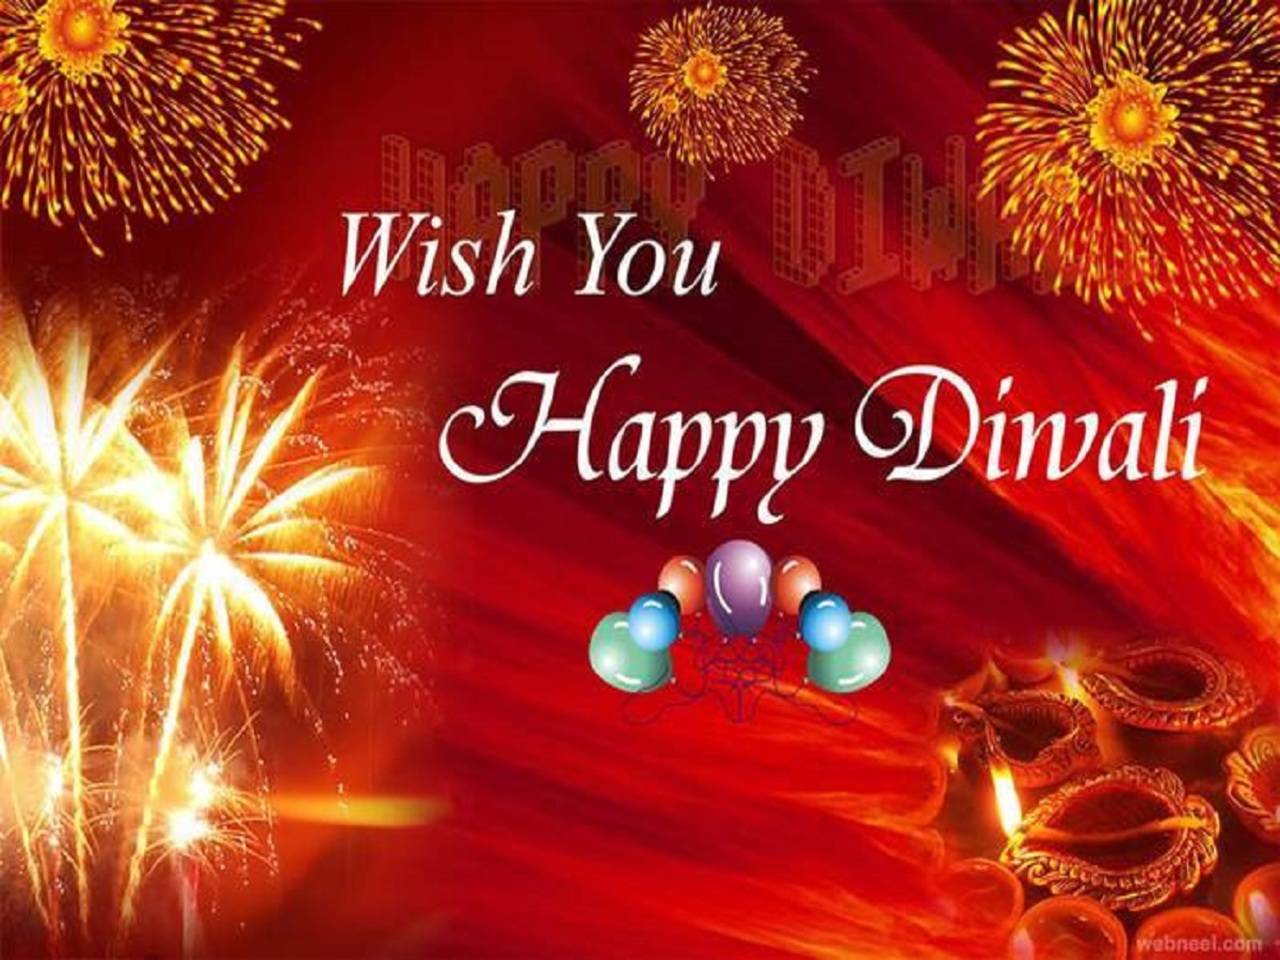 Diwali 2022 Greetings Images, Wishes & Messages: 5 Beautiful ...